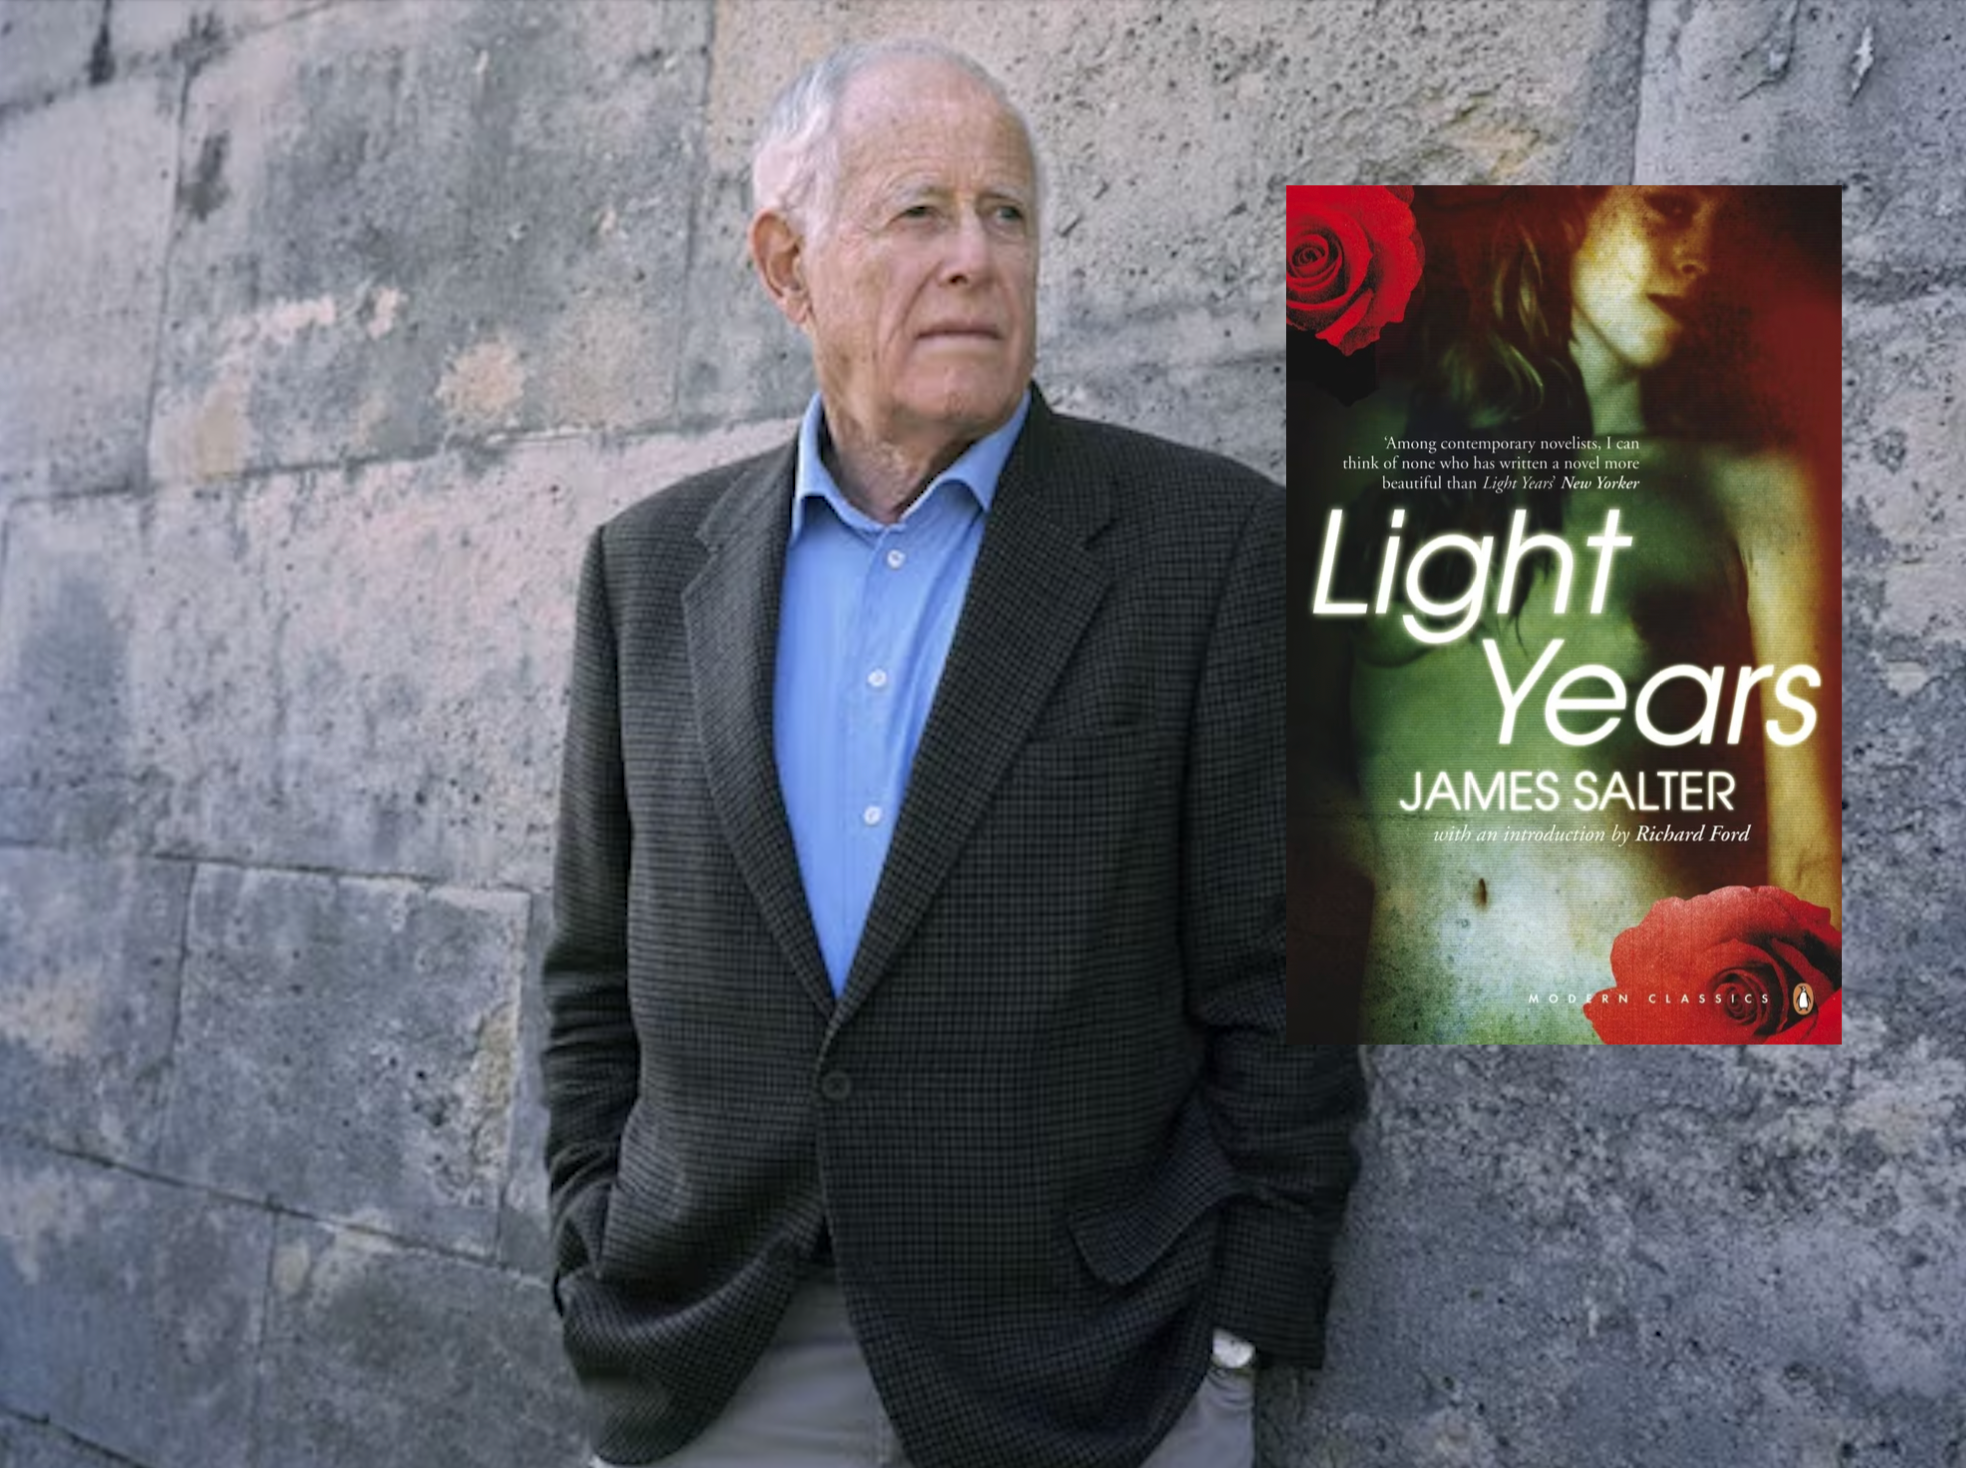 James Salter and the Penguin Modern Classics edition of his fourth novel, ‘Light Years’